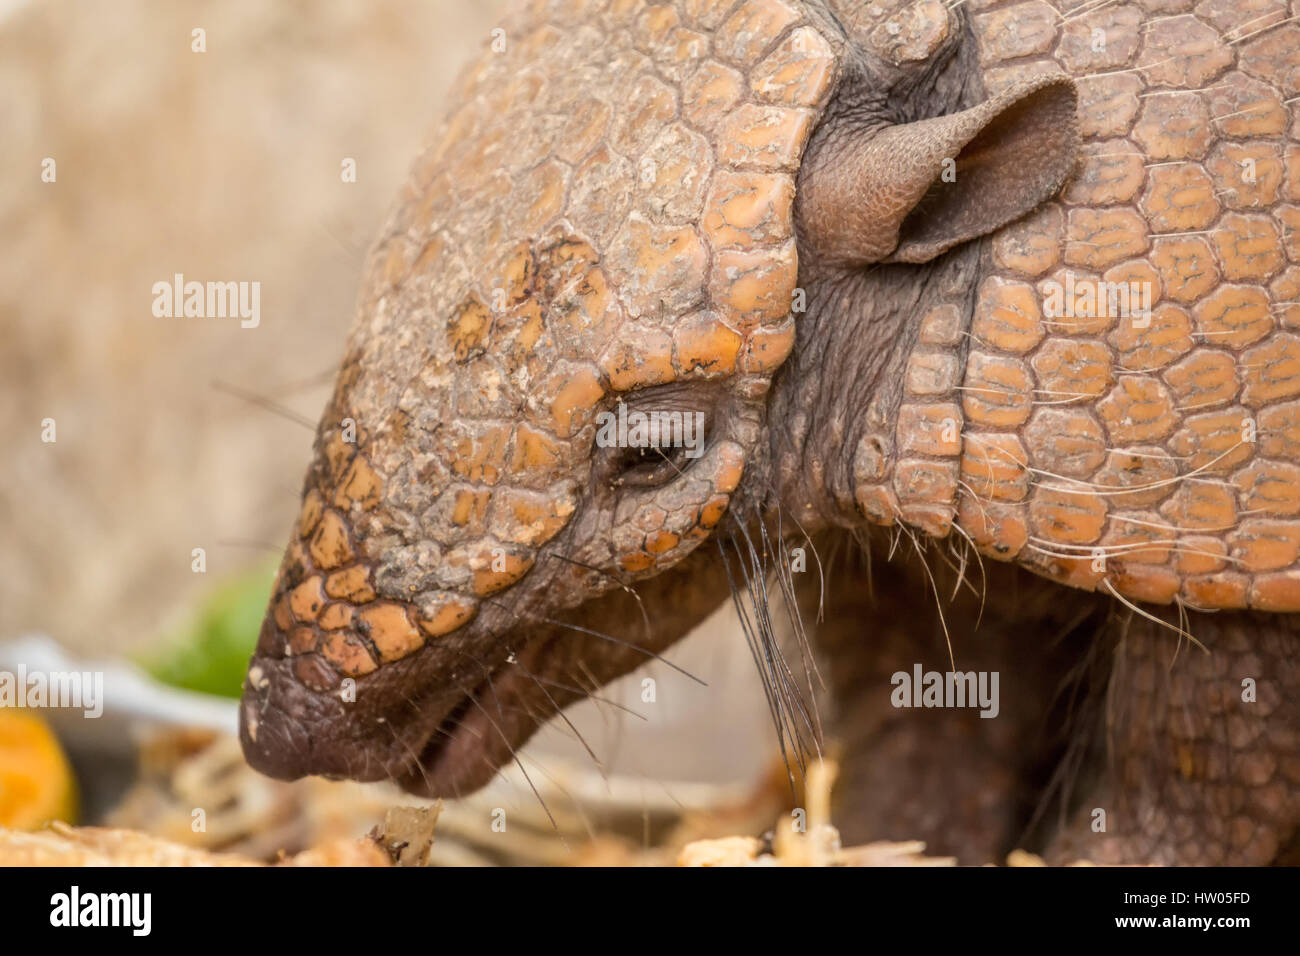 Seven-banded armadillo eating table scraps set out for it in the Pantanal region, Mato Grosso, Brazil, South America Stock Photo